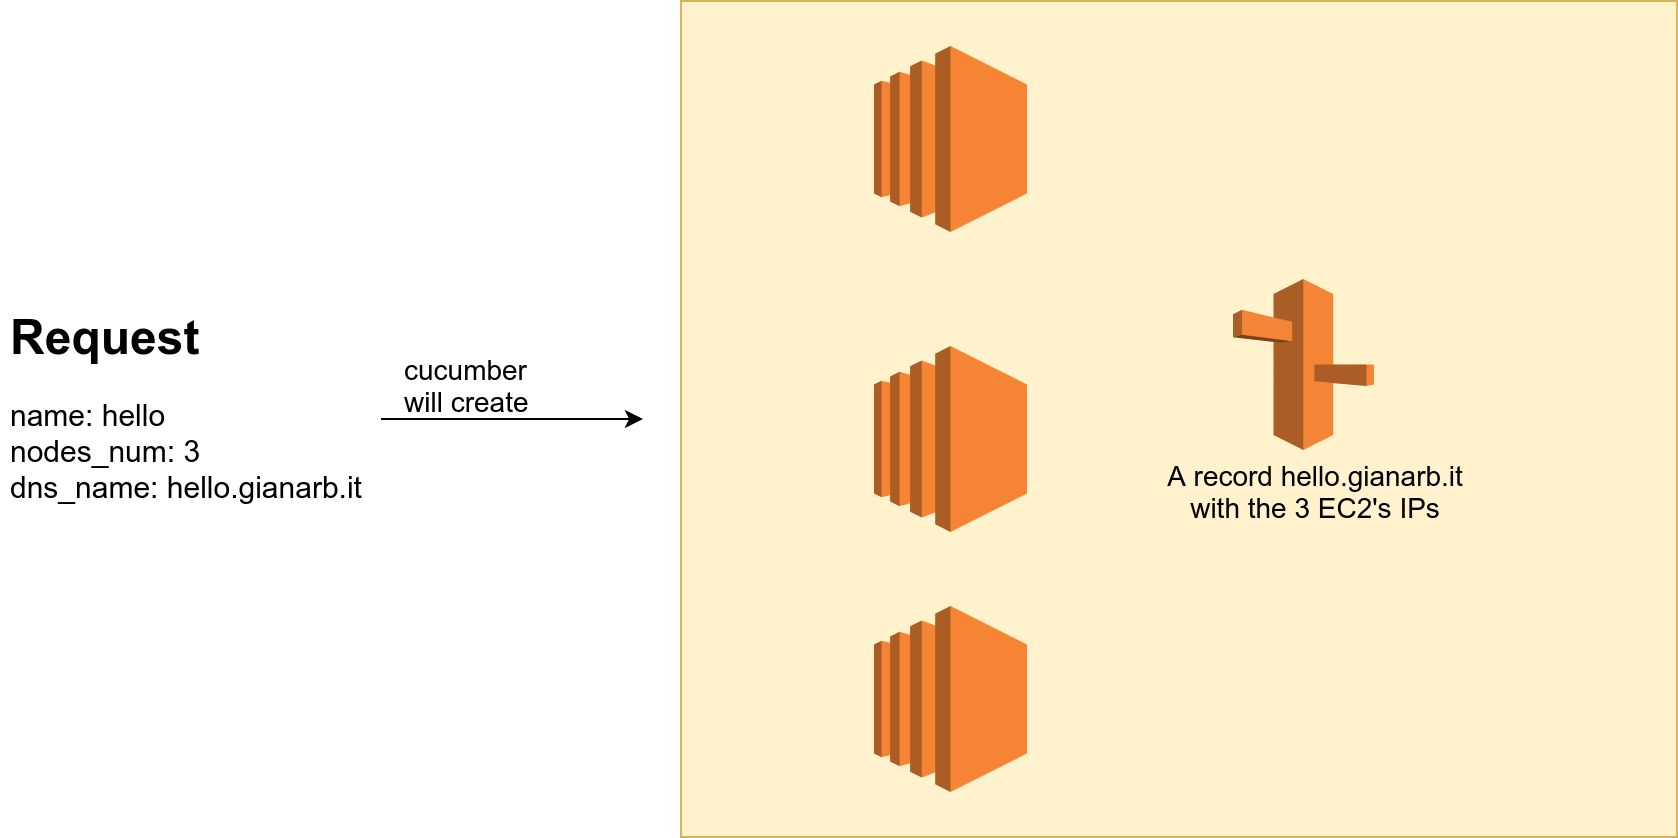 The architecture provisioned by cucumber on AWS